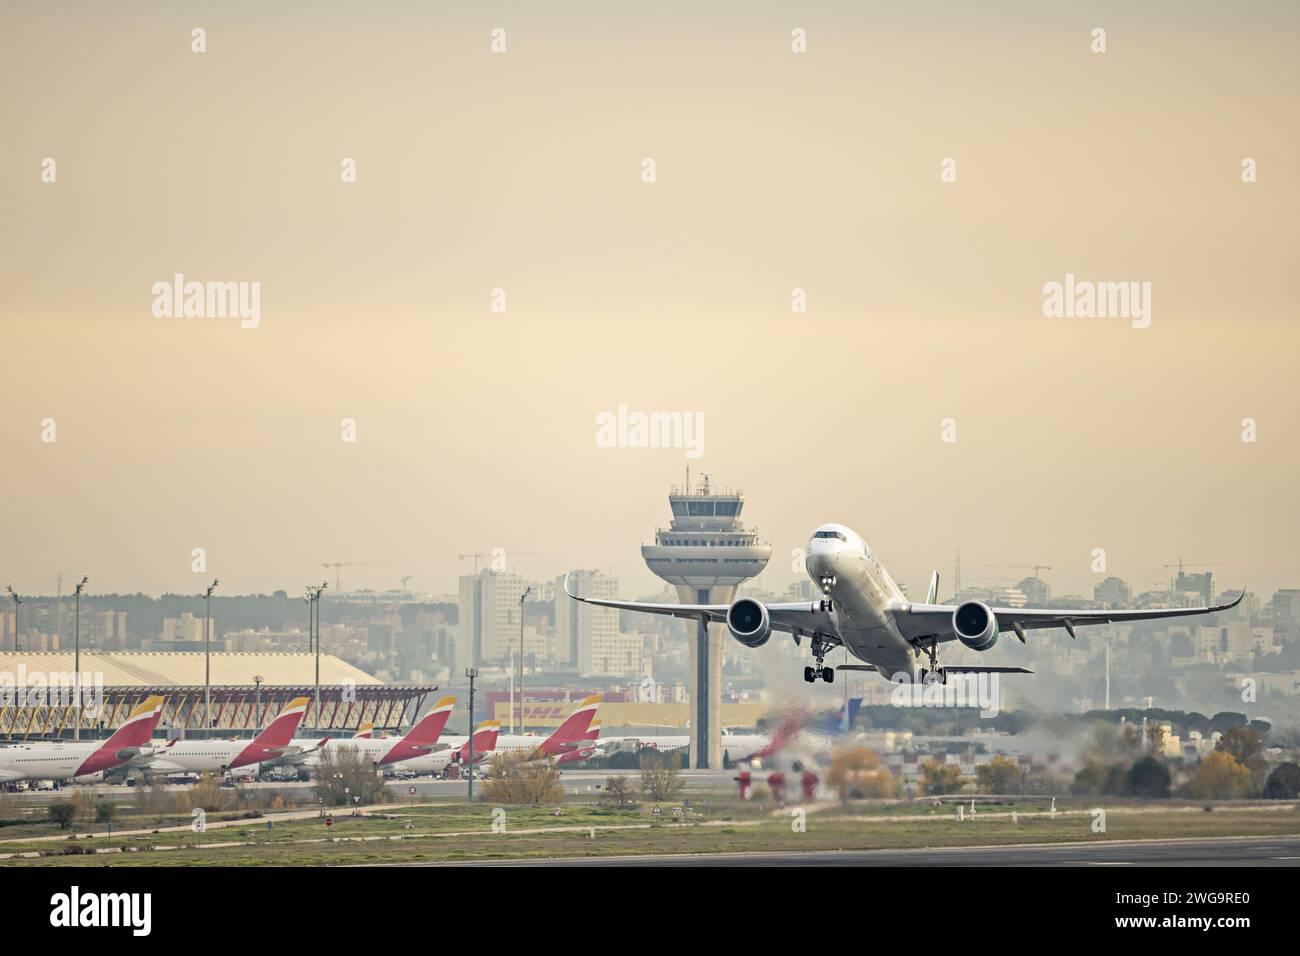 Airplane after boarding takeoff near the control tower heading to its destination Stock Photo